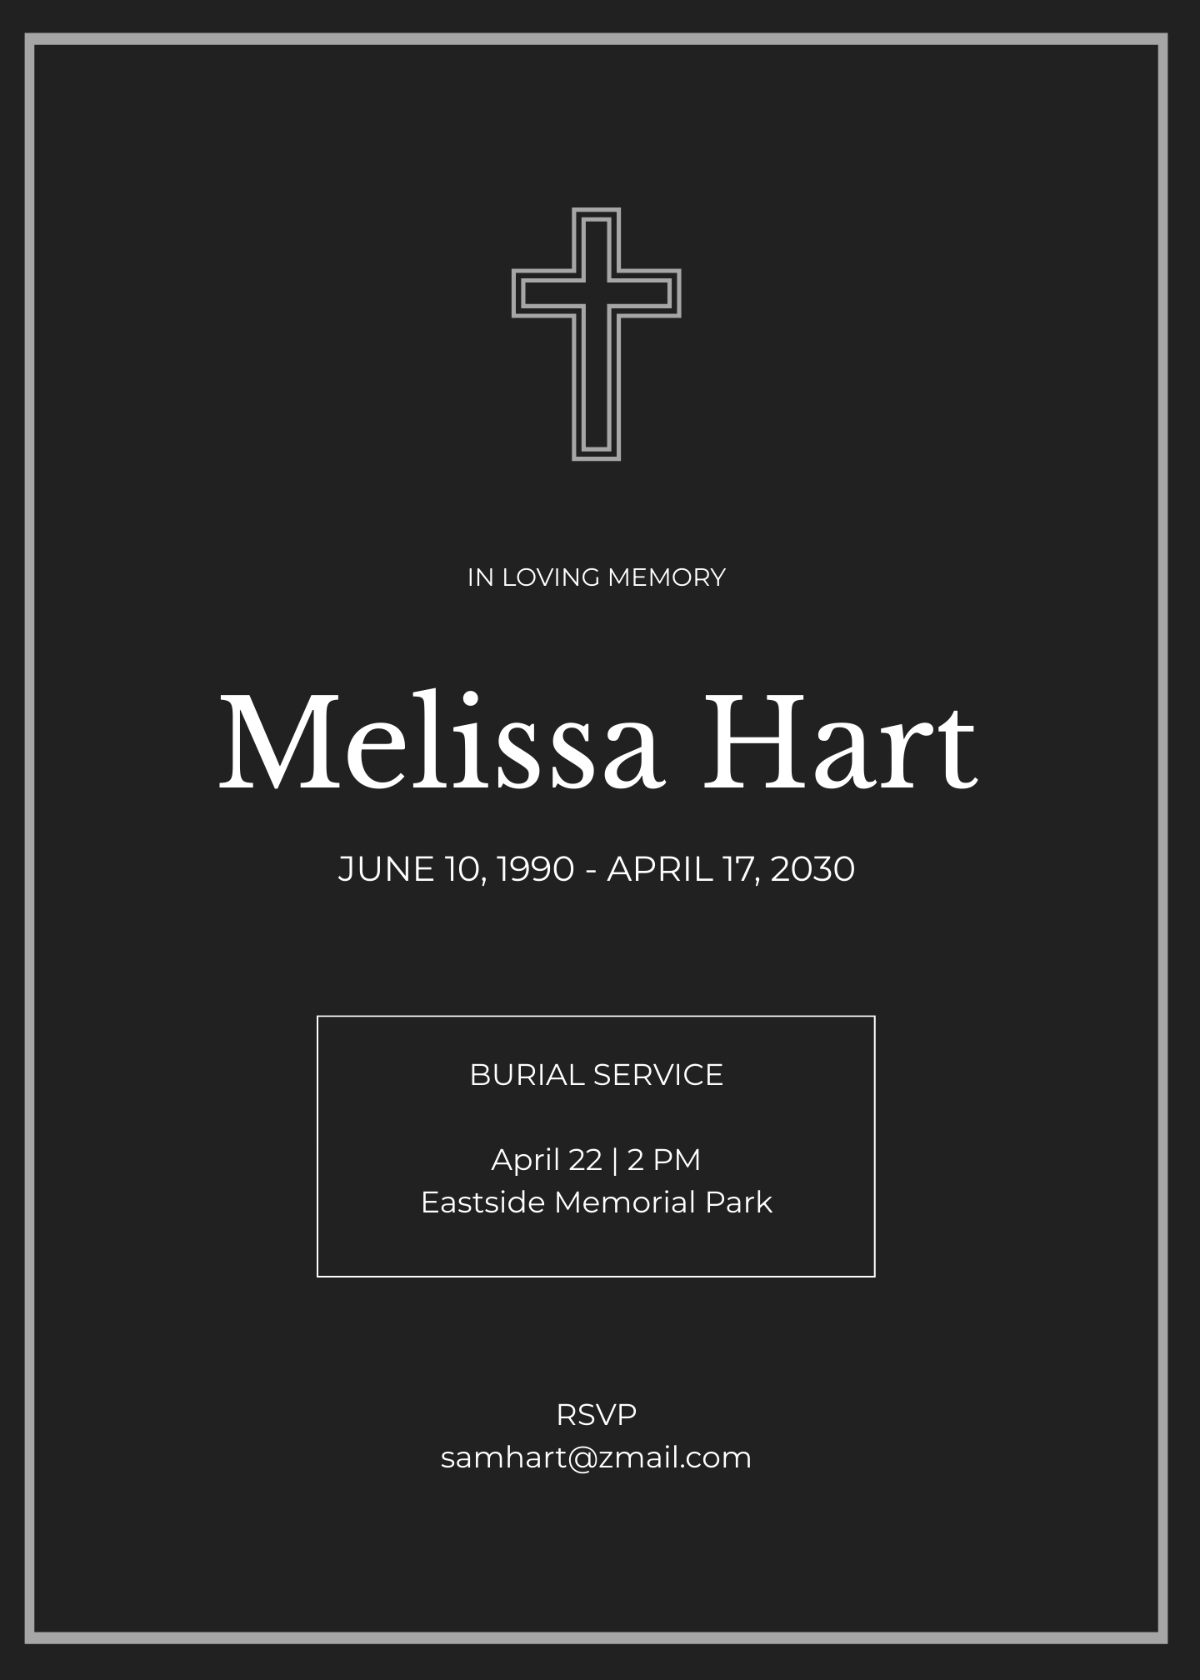 Simple Funeral Burial Invitation Template